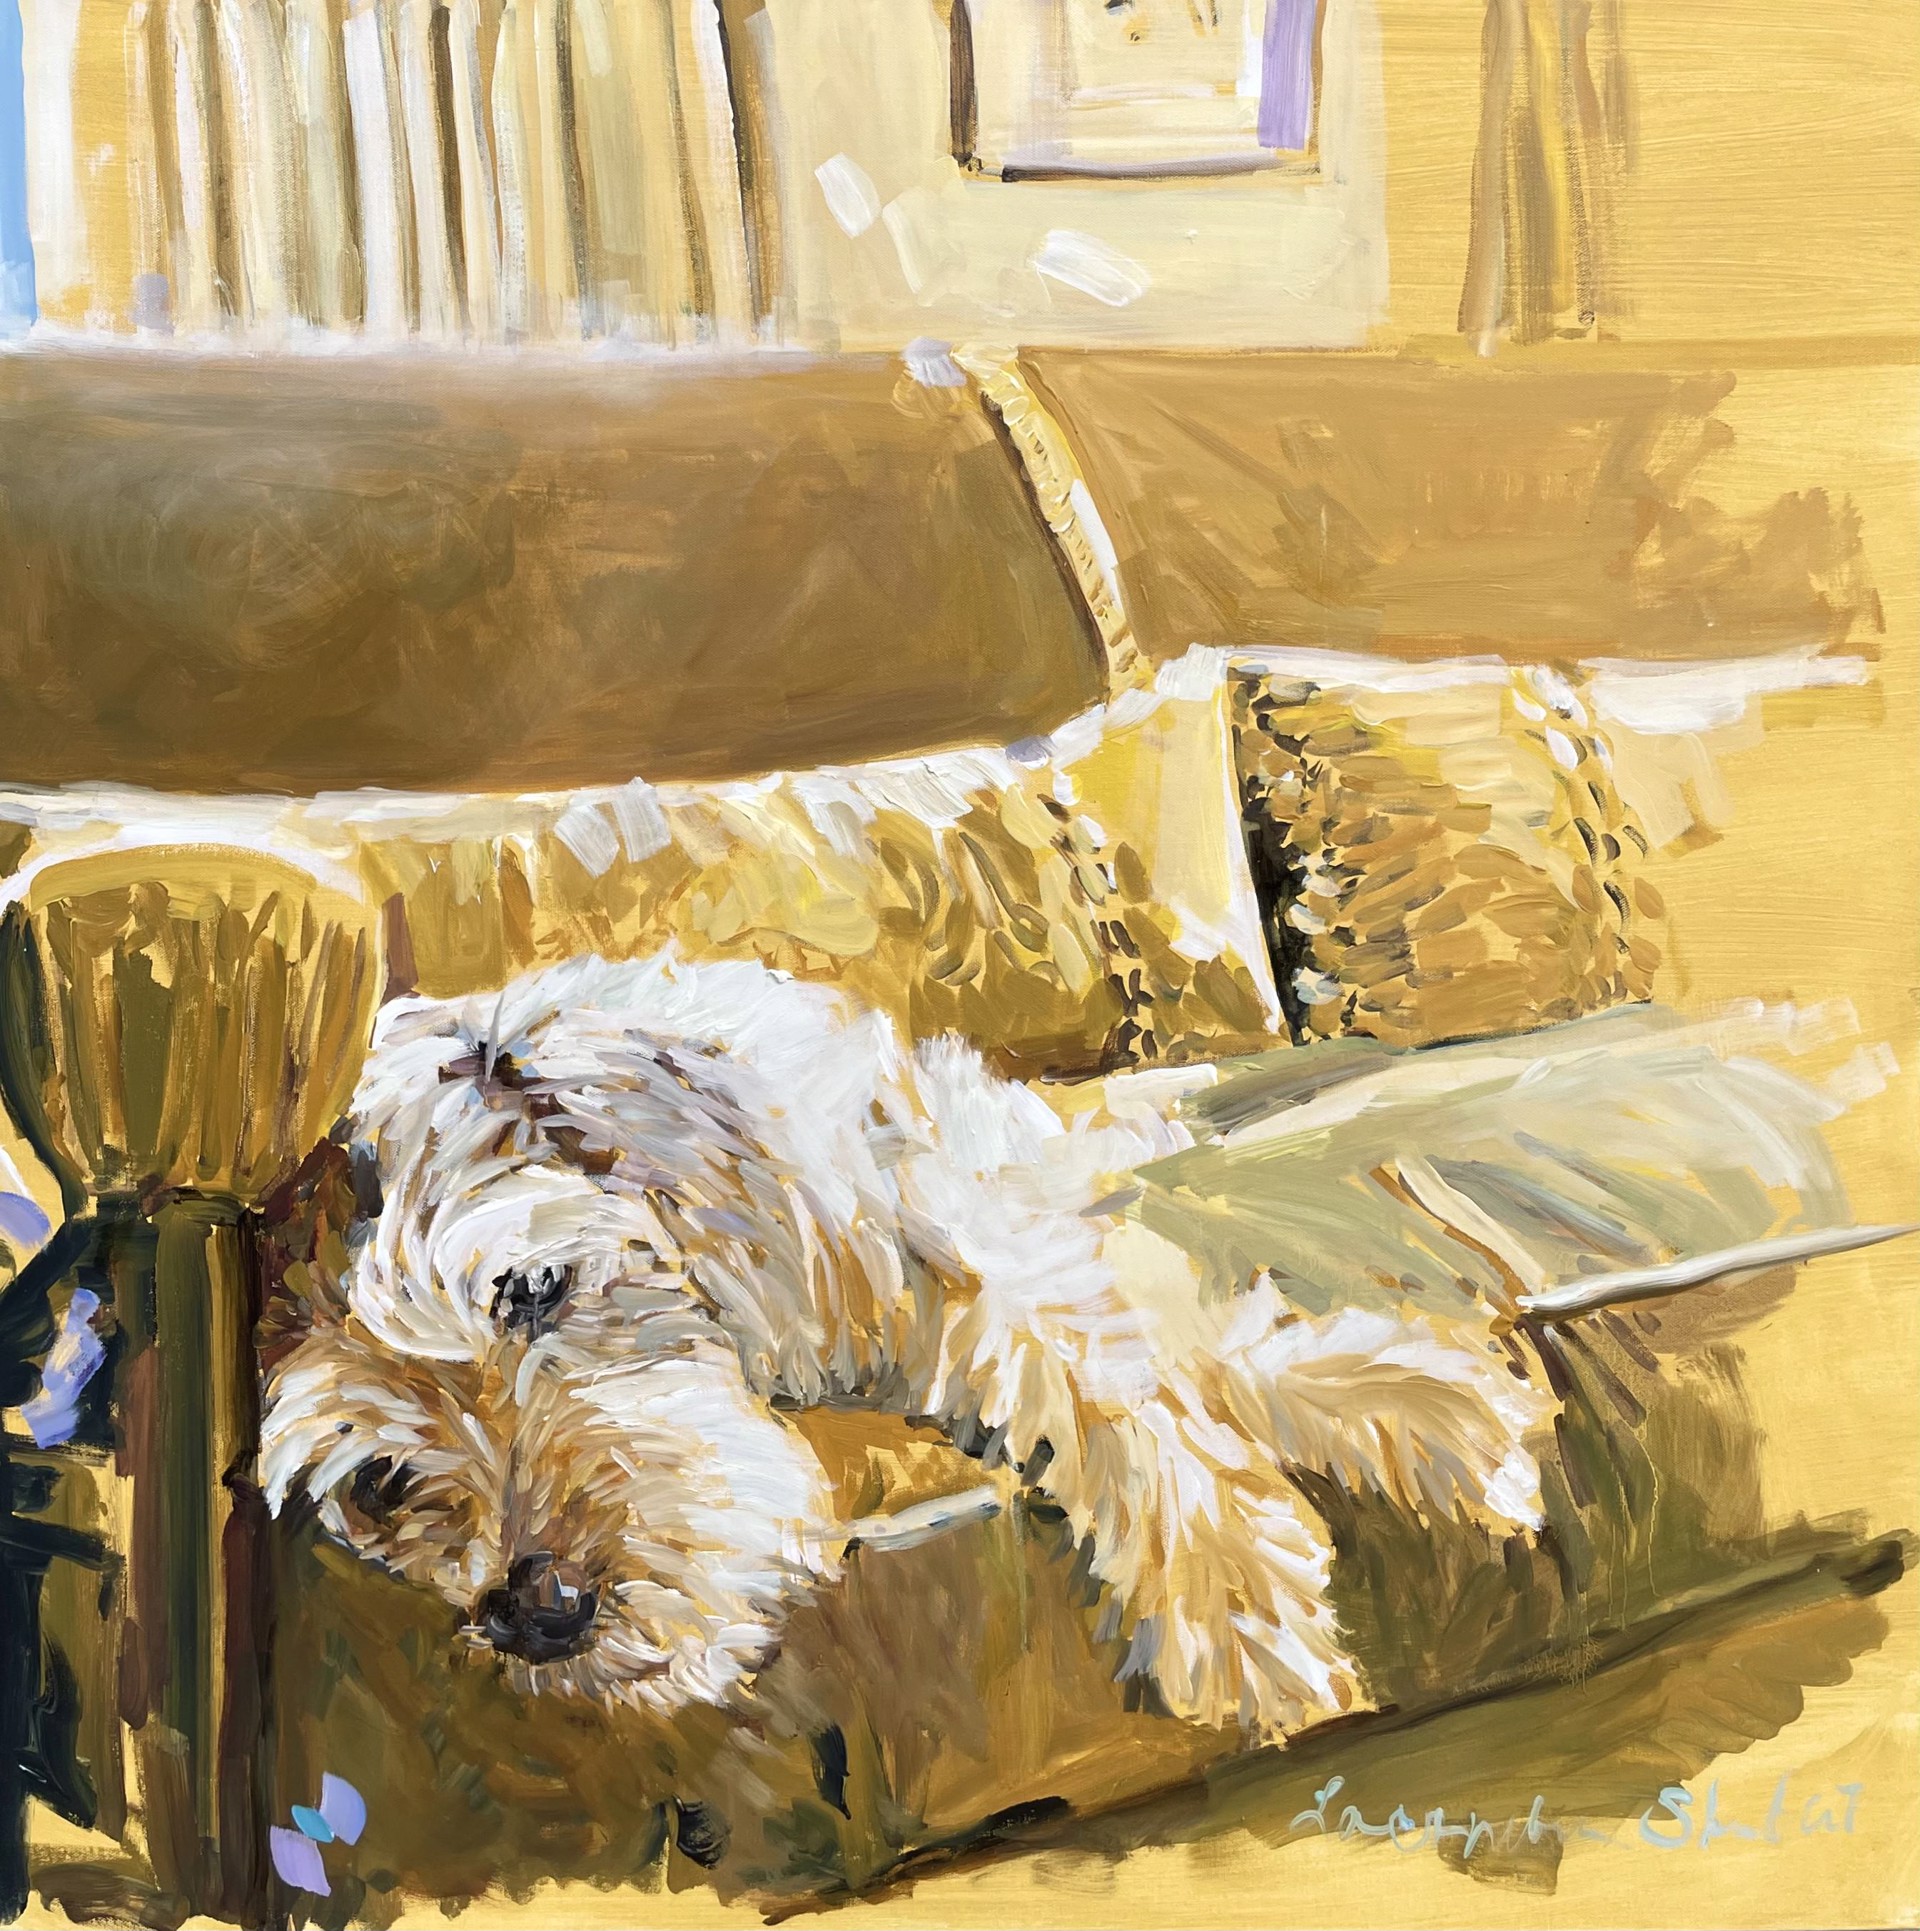 Relaxing on the Couch by Laura Lacambra Shubert